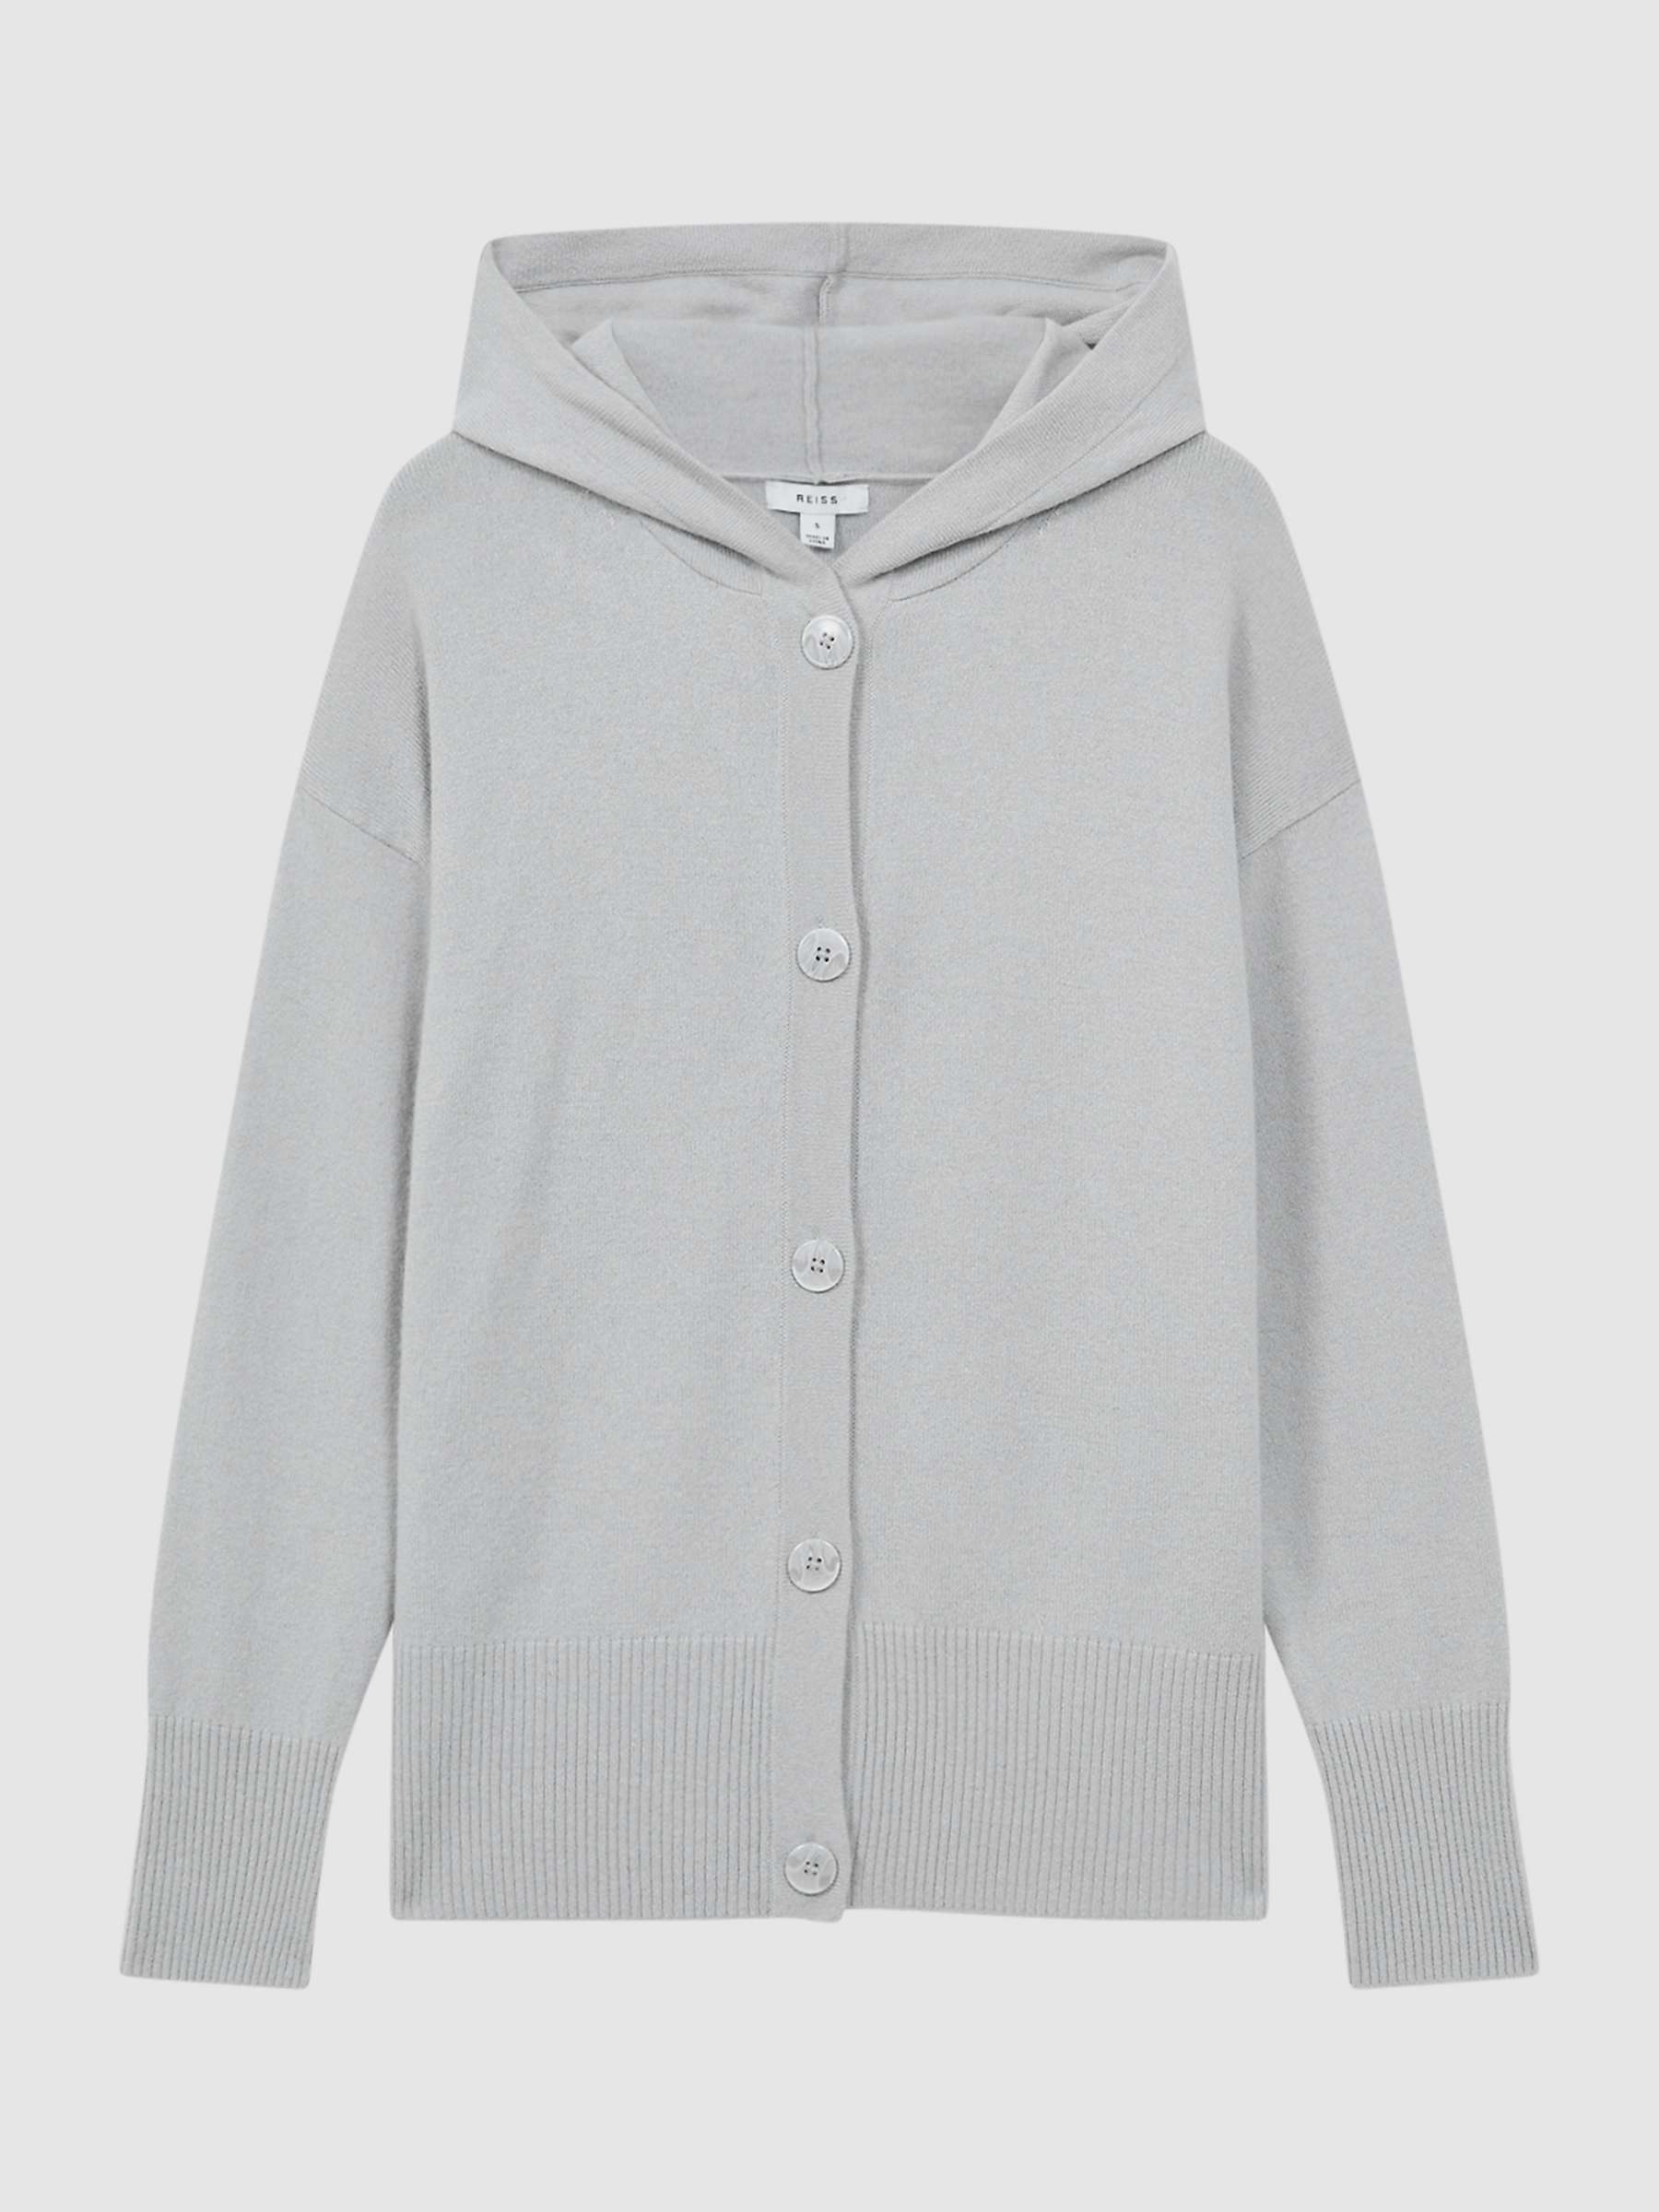 Buy Reiss Evie Wool Cashmere Blend Hooded Cardigan Online at johnlewis.com